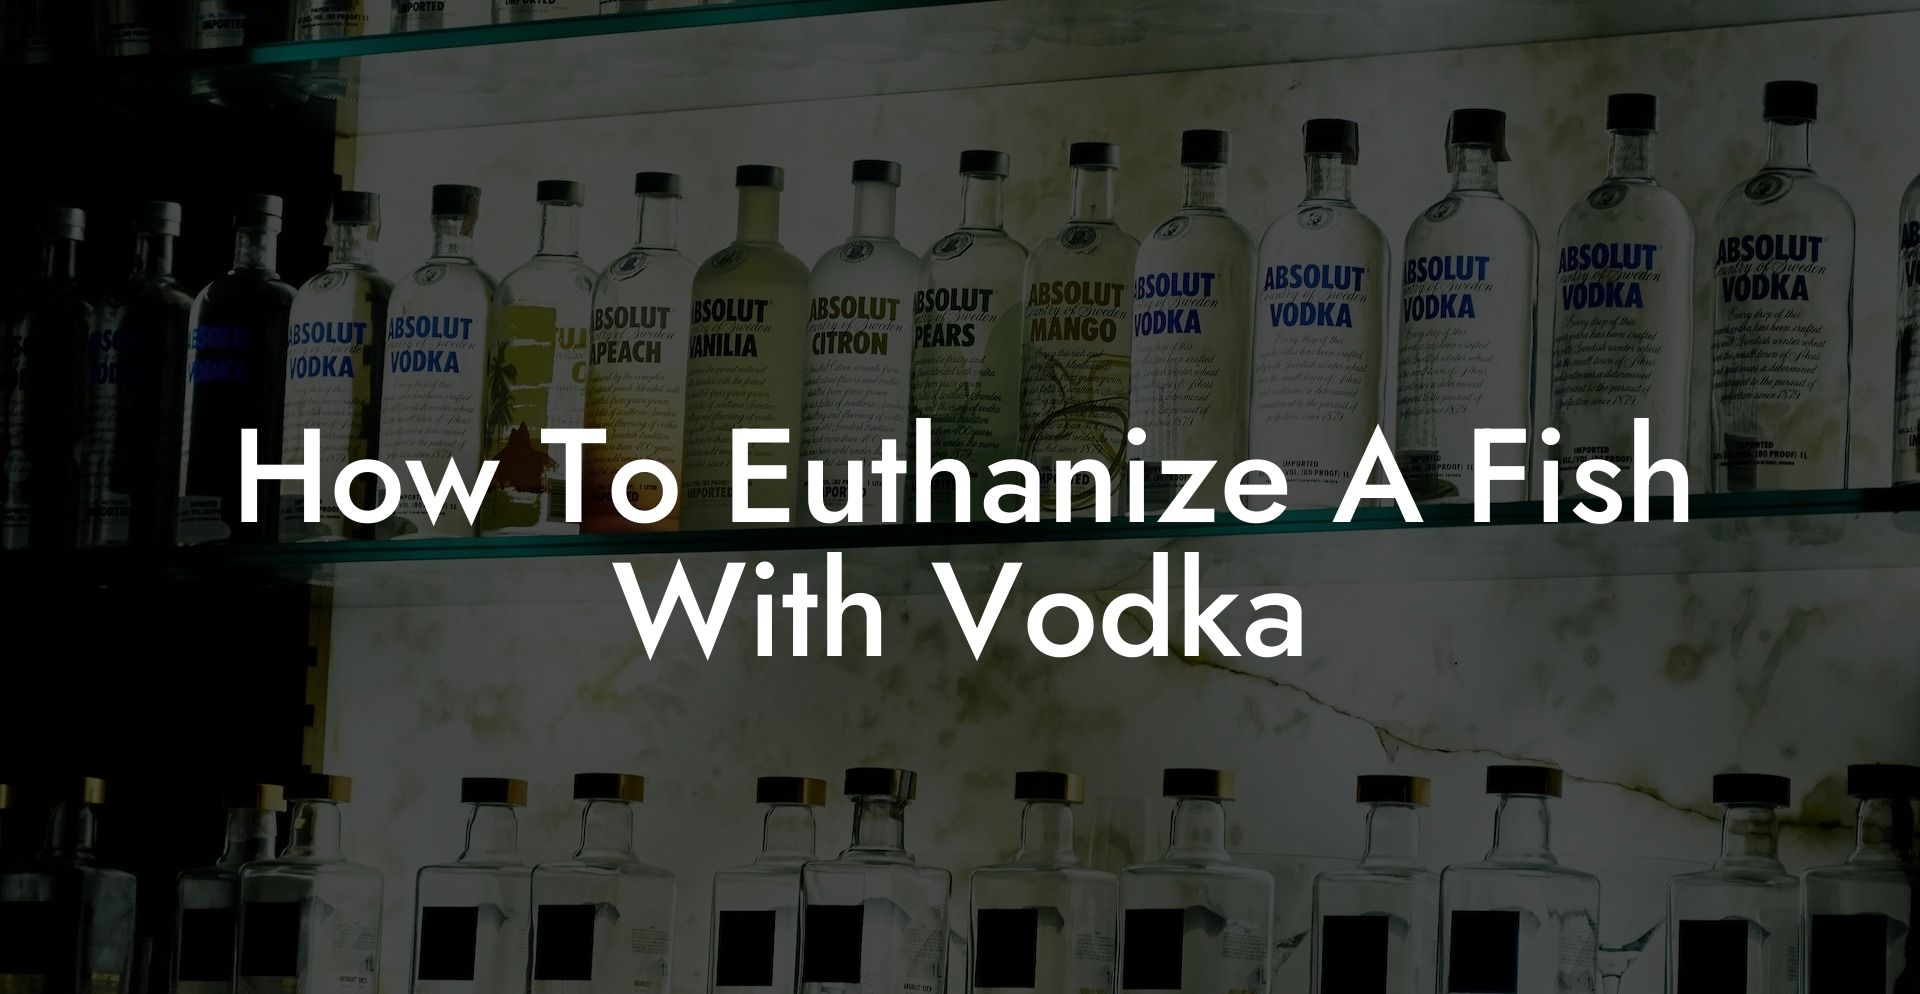 How To Euthanize A Fish With Vodka